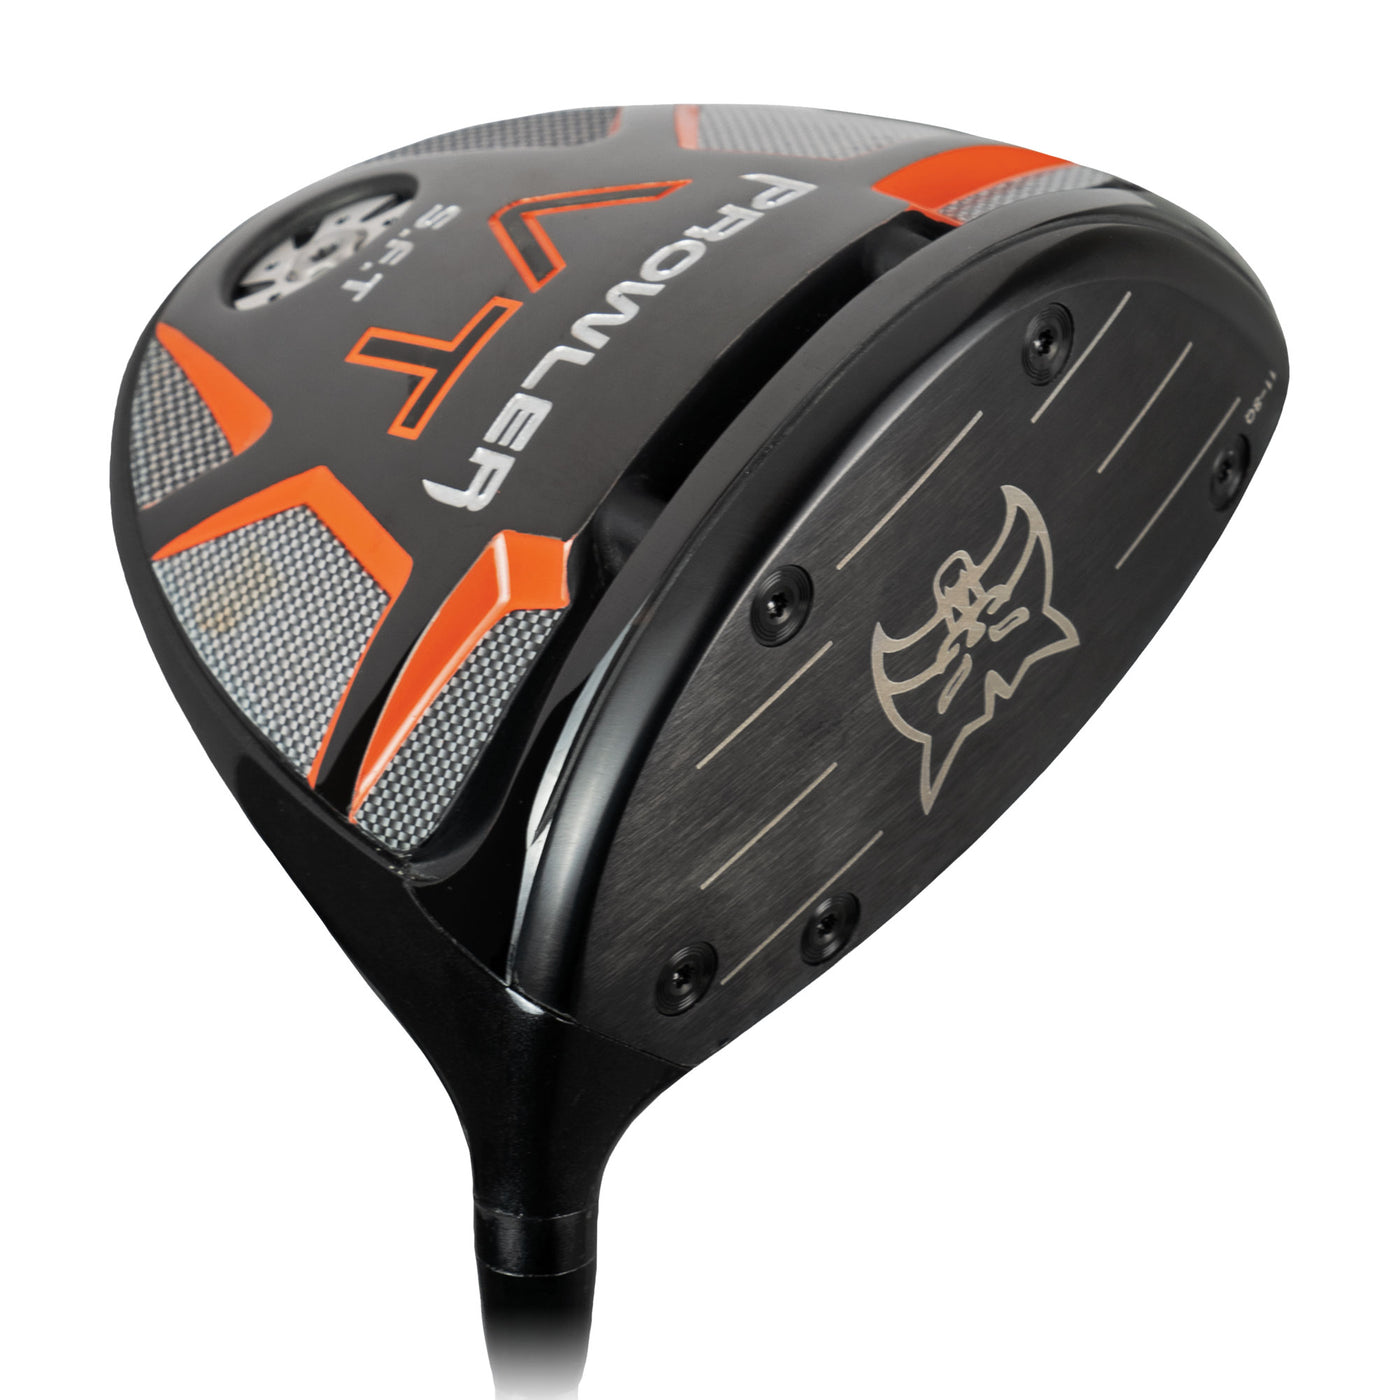 Prowler VT Driver with S.F.T - Lynx Golf UK